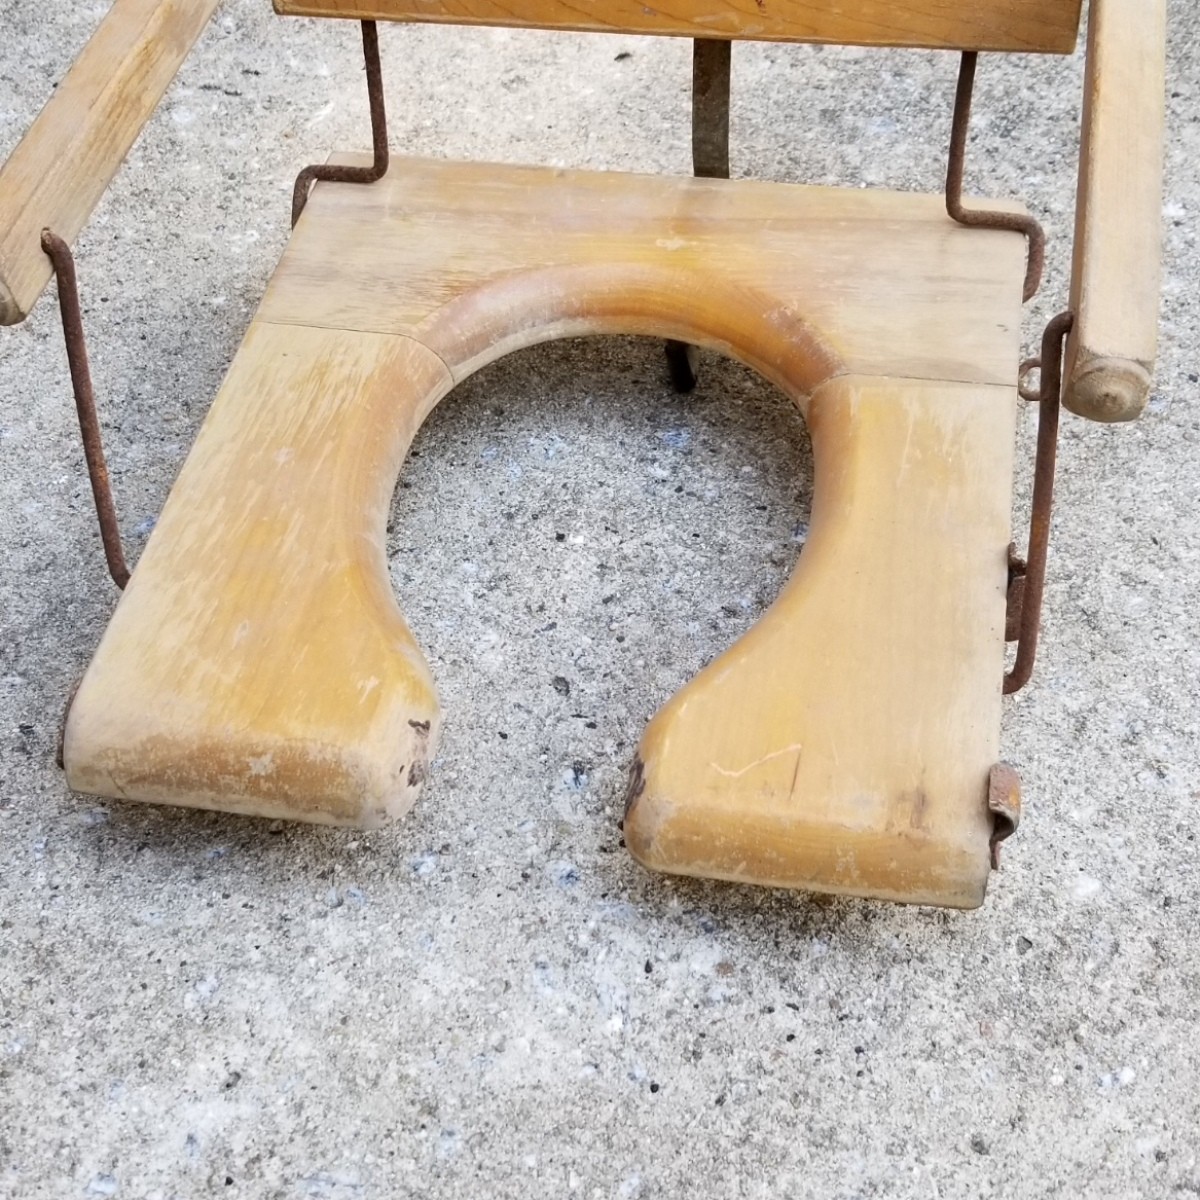 Value of a Vintage Collapsible Wooden Potty Seat? | ThriftyFun